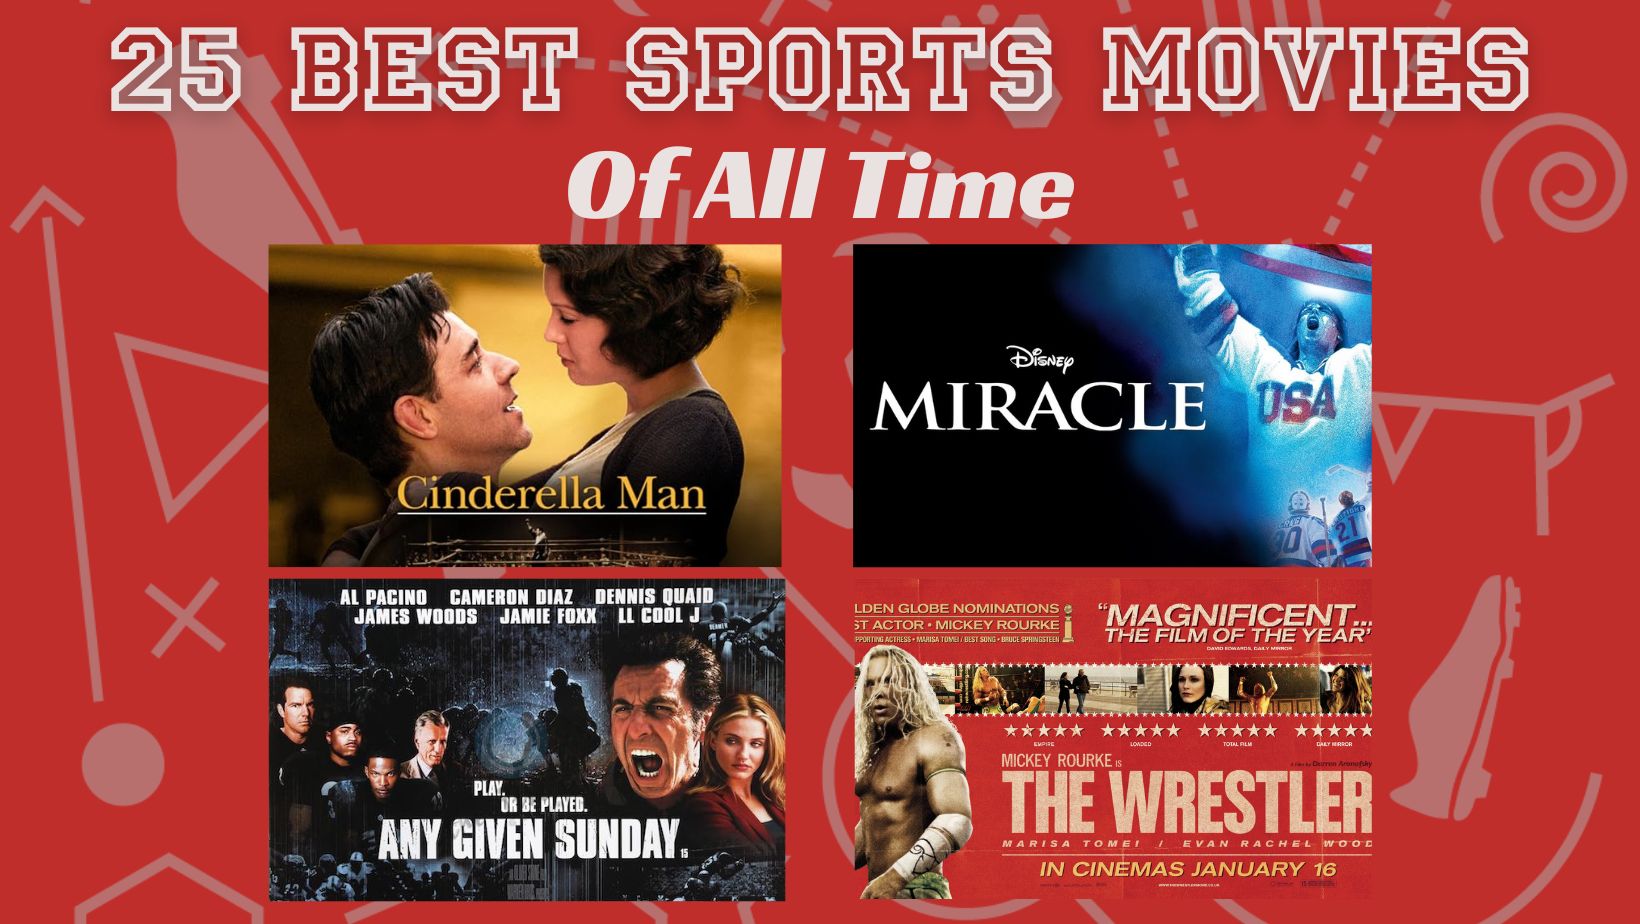 25 Best Sports Movies of All Time